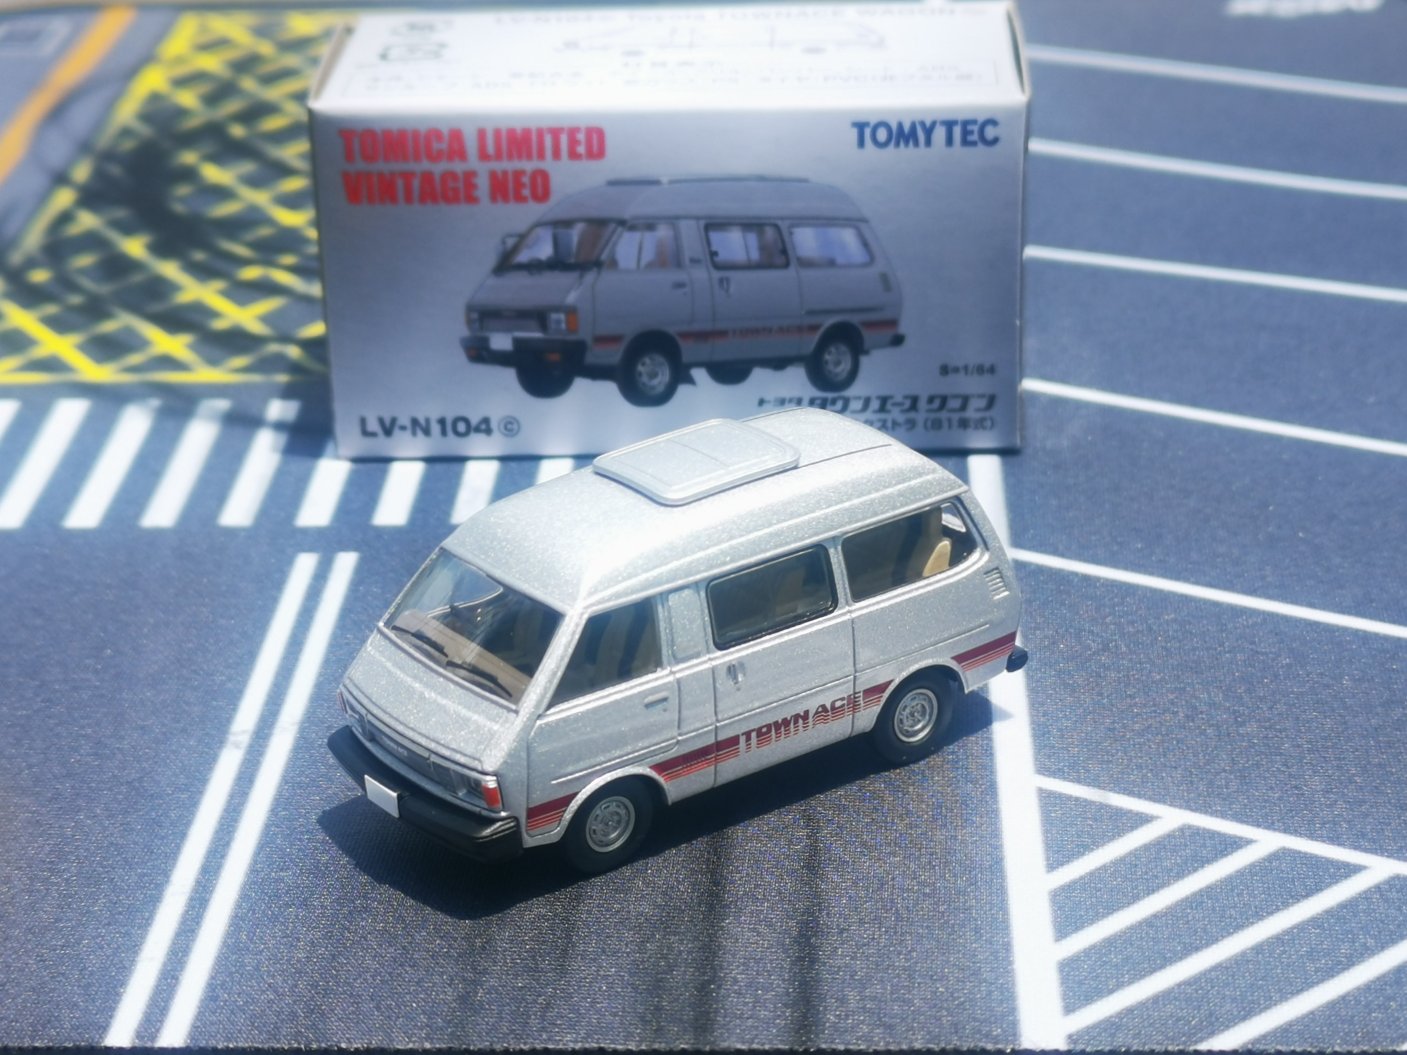 Tomica Limited Vintage Neo LV-N104c TOYOTA Town Ace Wagon 1800 Super Extra 81 Years (Silver)